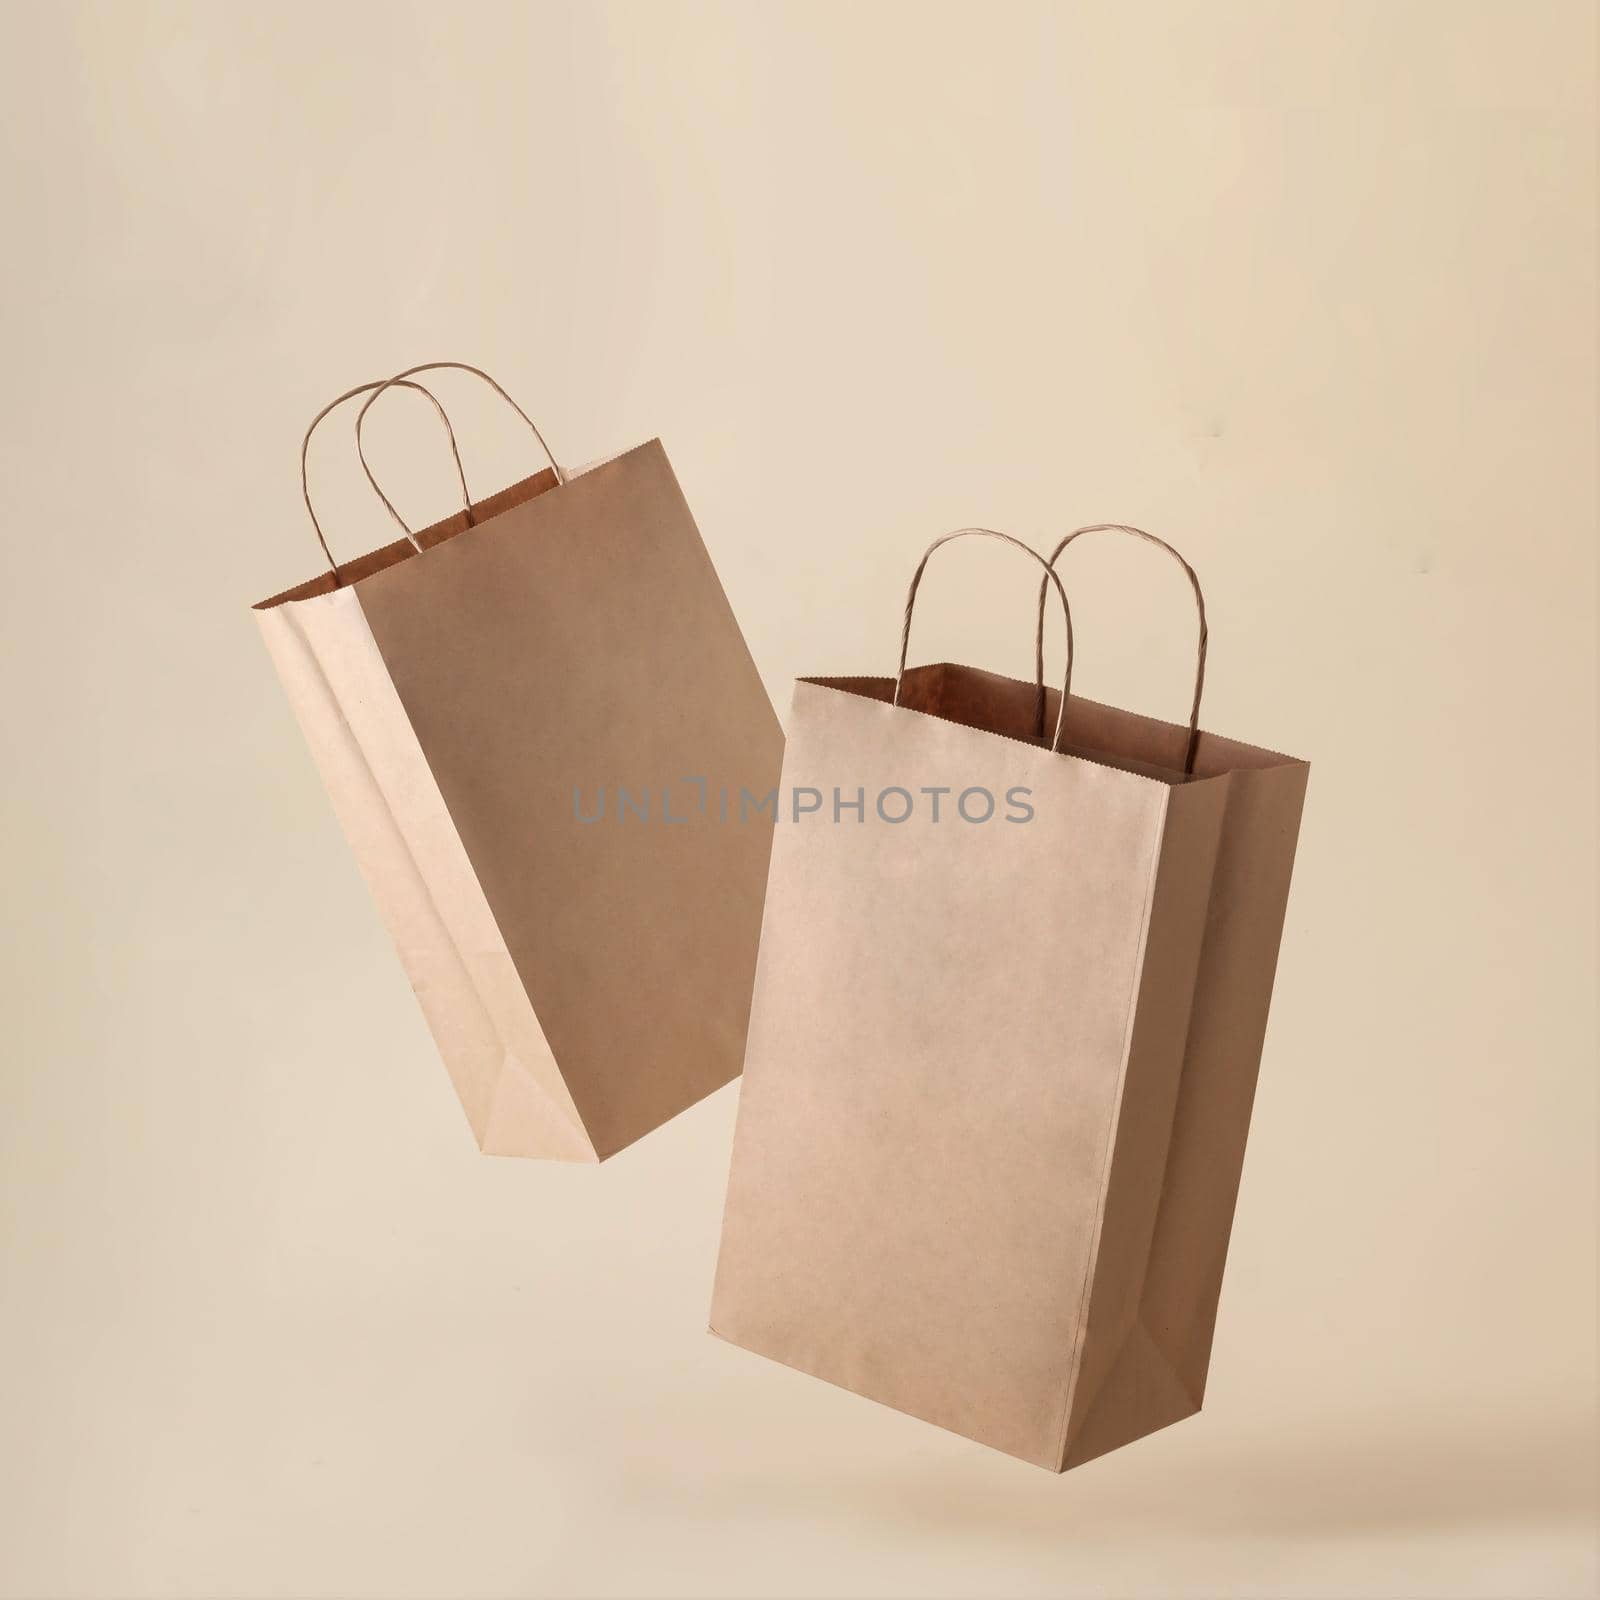 Two paper bags in a container levitation on a clean beige background for shopping in a store and selling food products or marketing as well as for delivery.